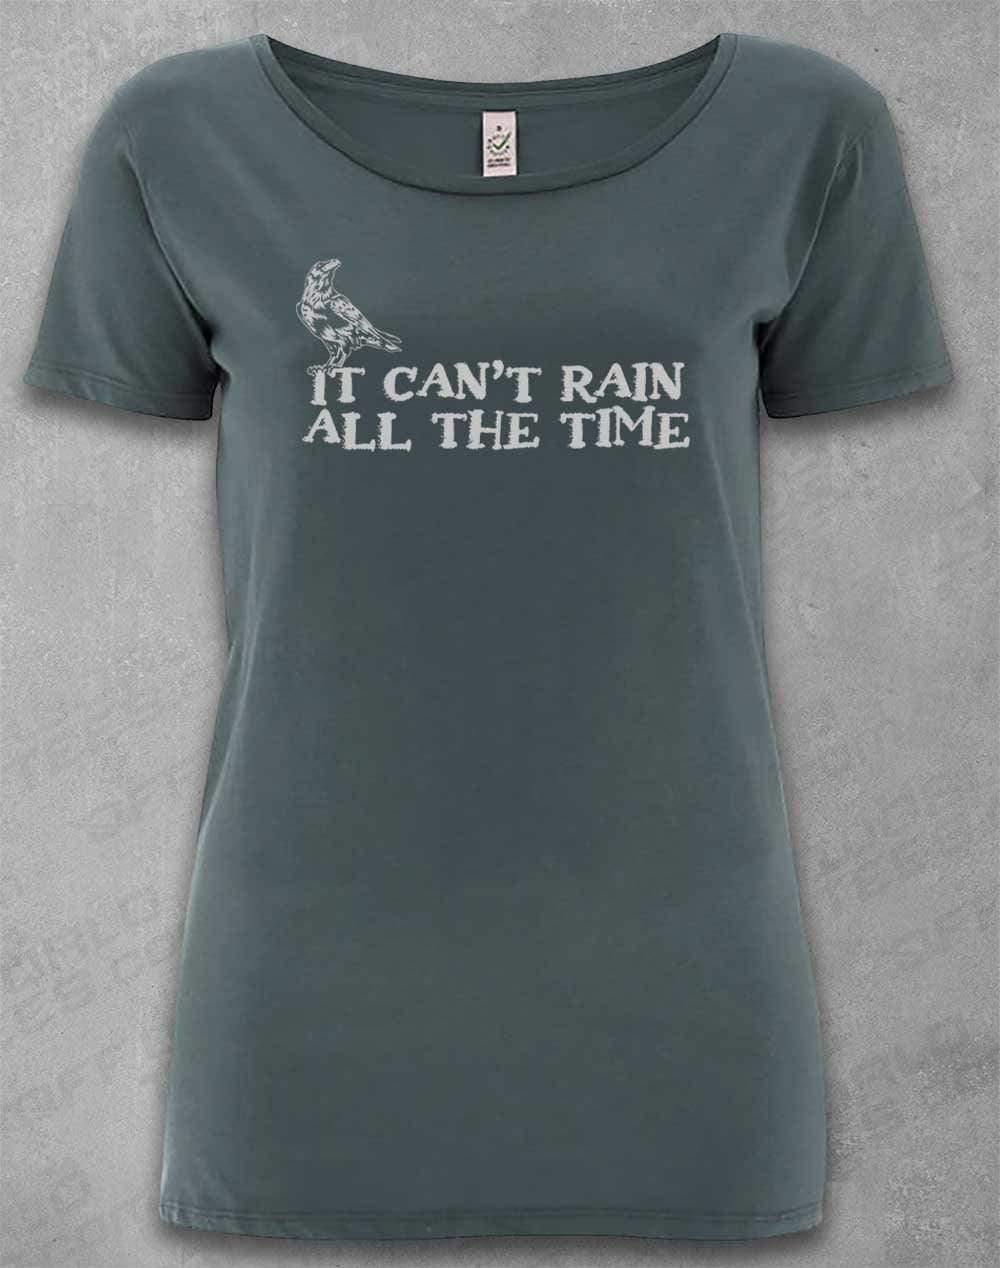 DELUXE It Can't Rain All the Time Organic Scoop Neck T-Shirt 8-10 / Light Charcoal  - Off World Tees